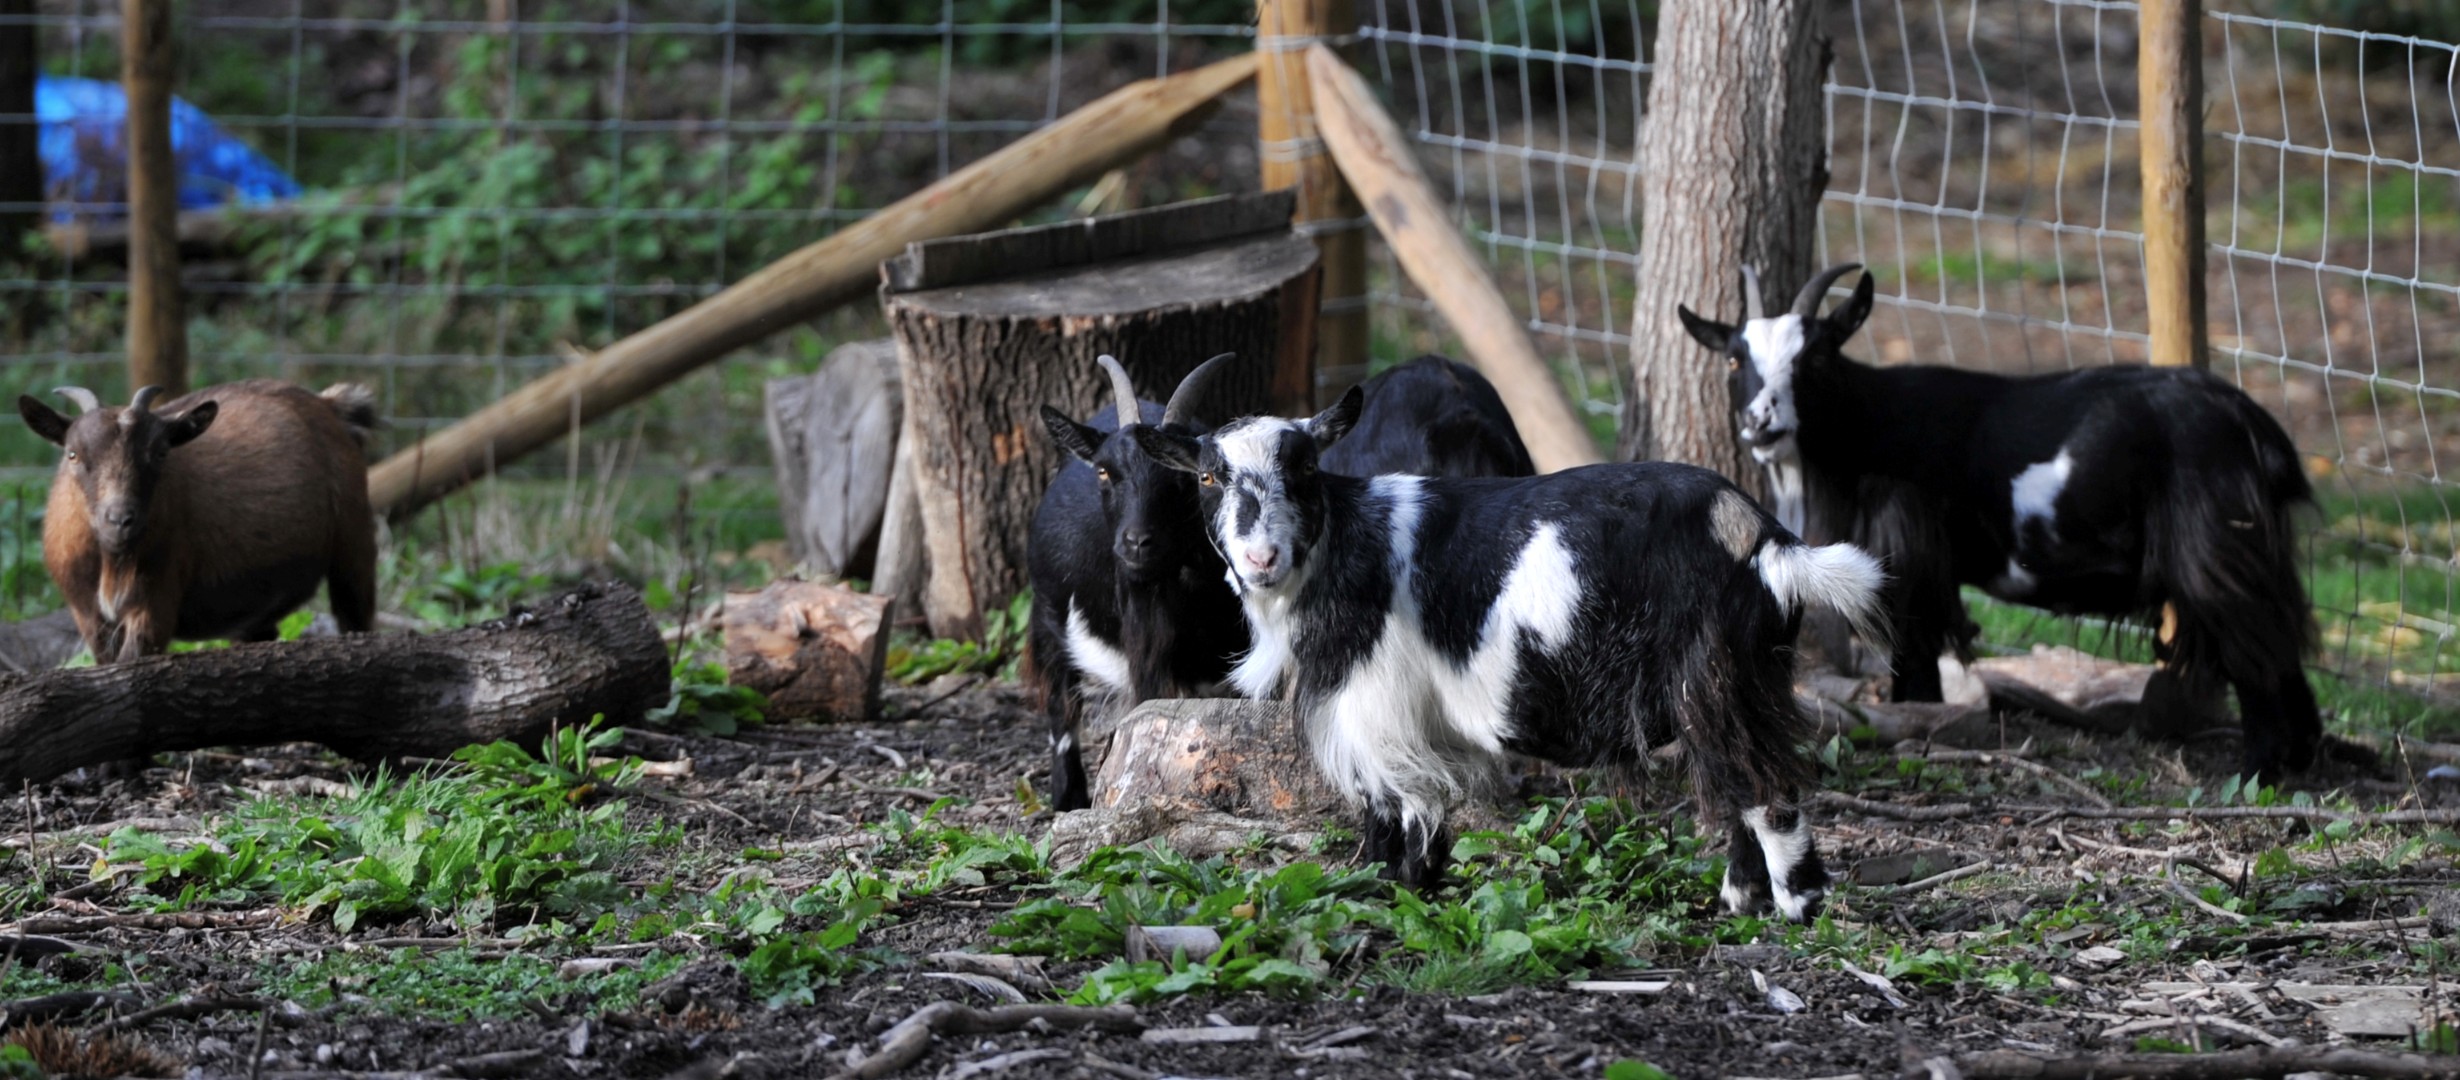 Image shows four of our pygmy goat family in their paddock